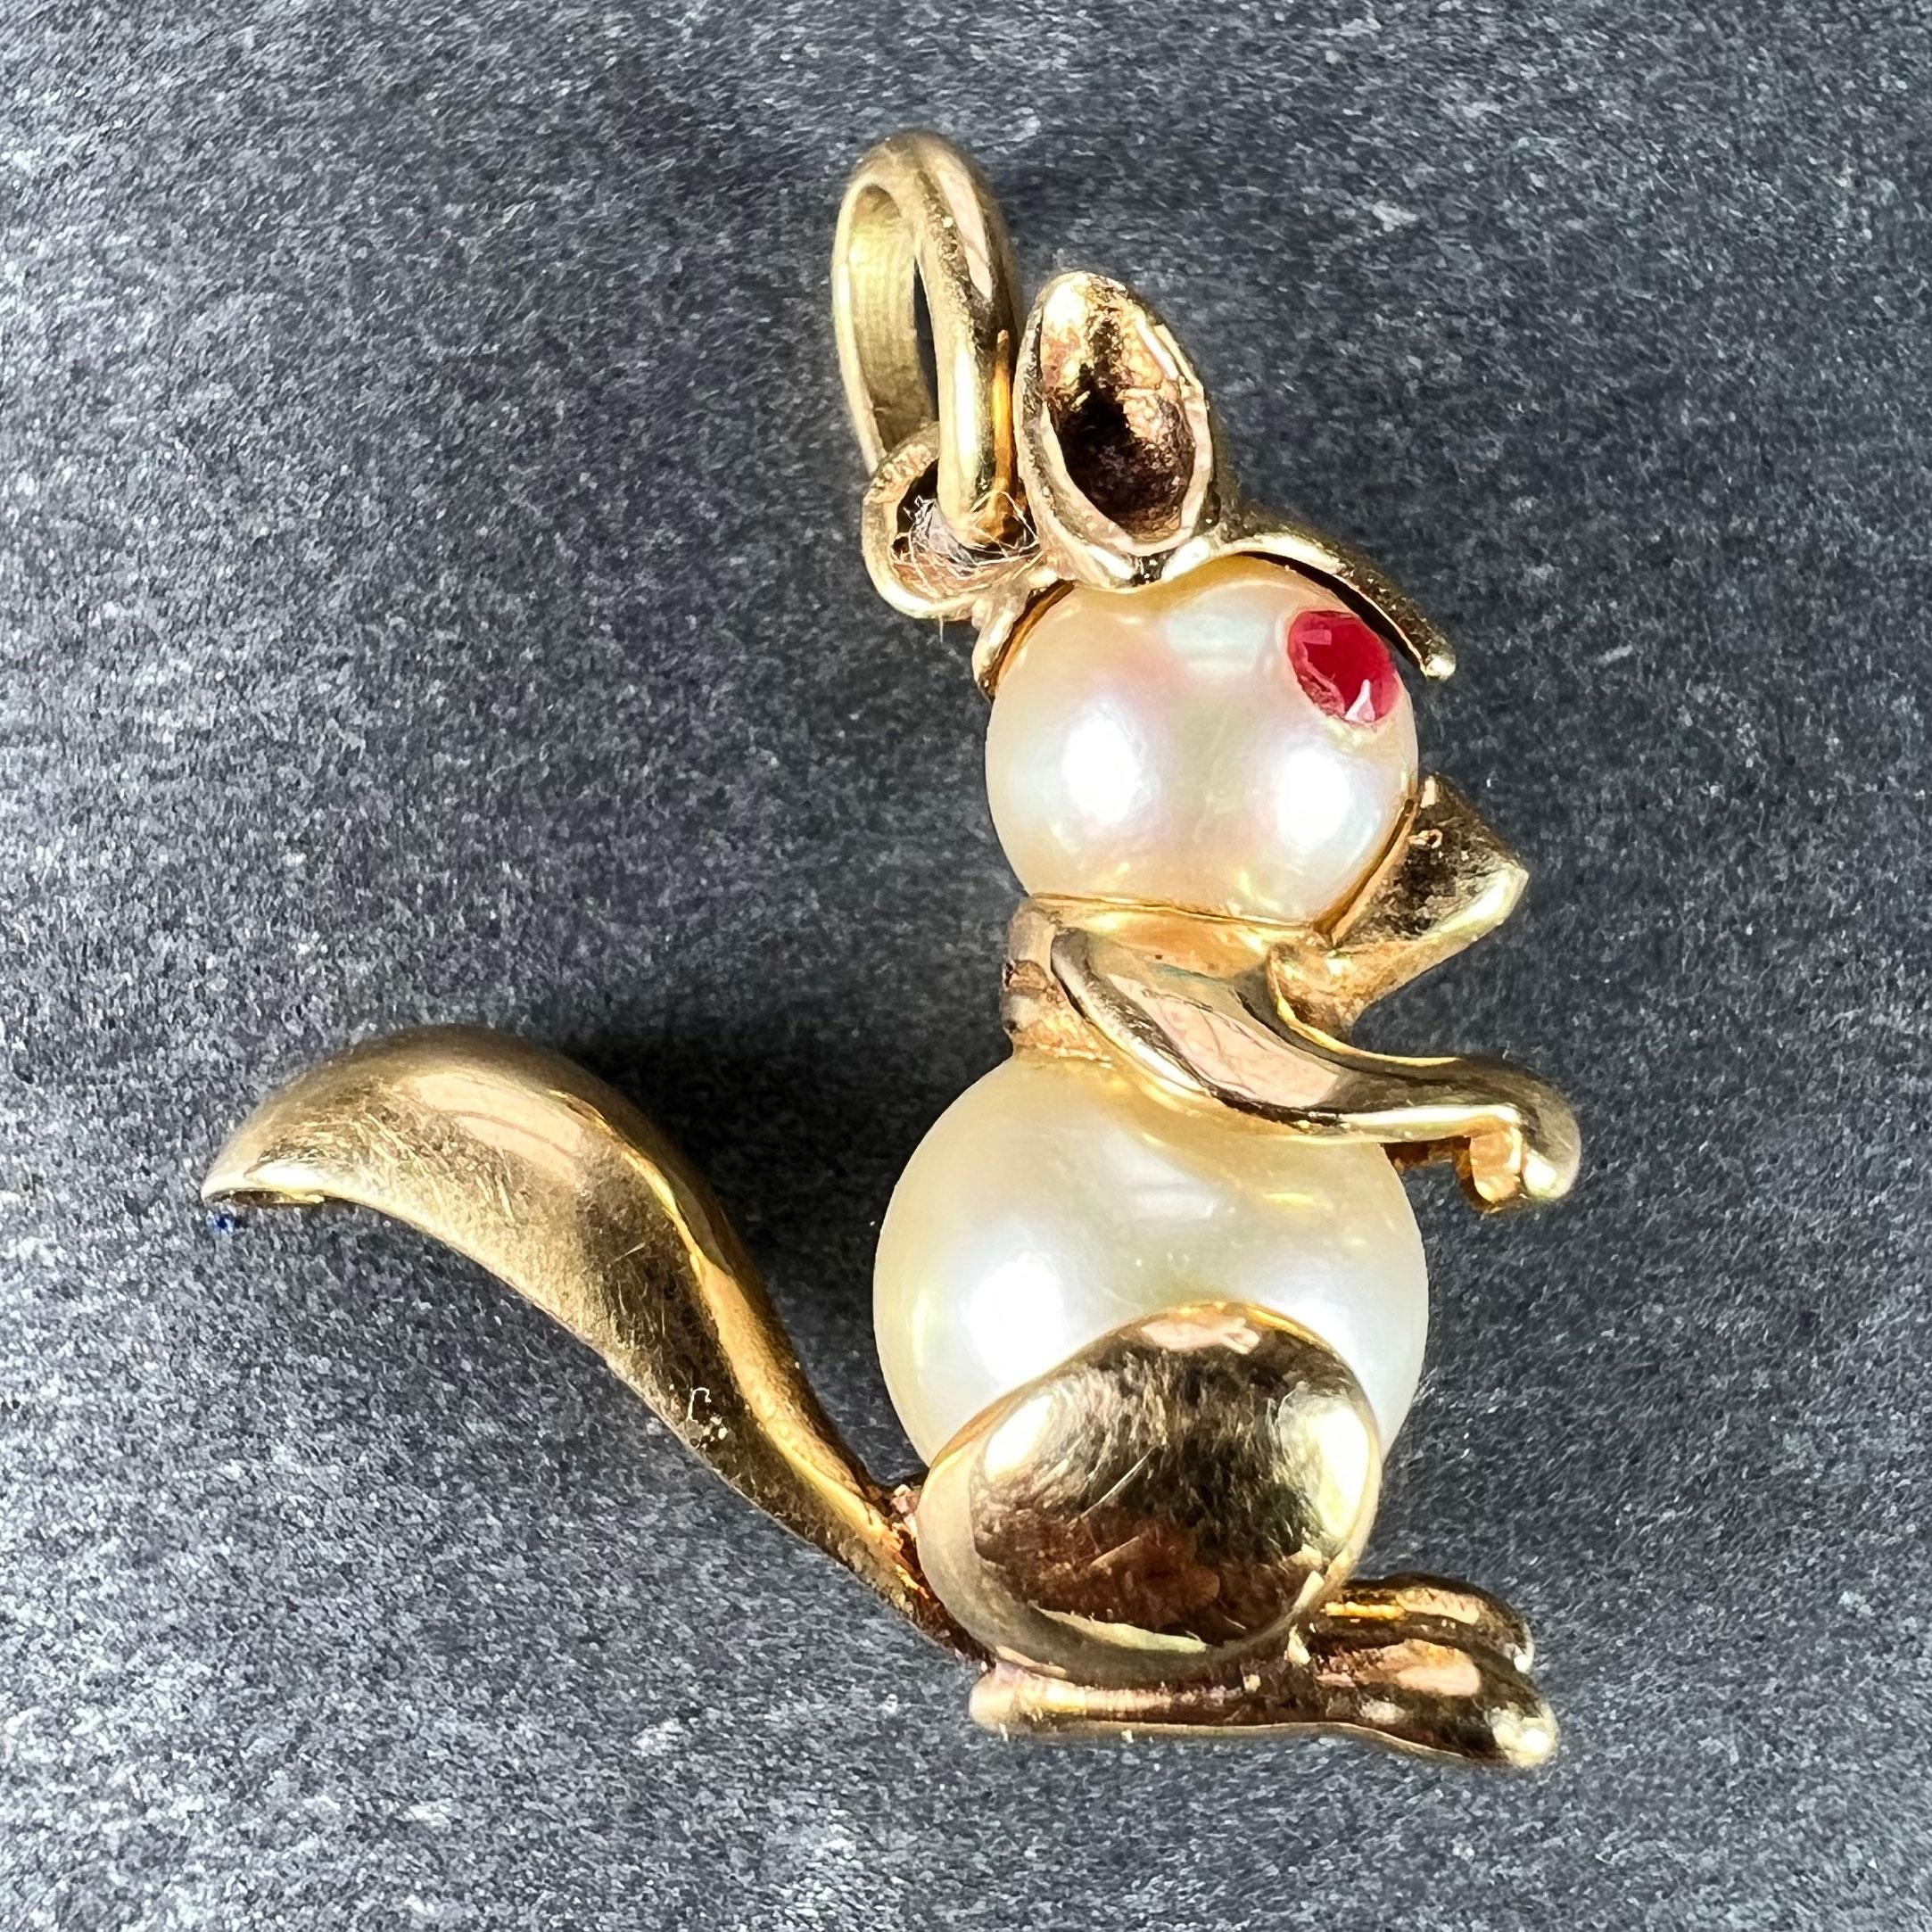 A French 18 karat (18K) yellow gold charm pendant designed as a squirrel with a body made of two cultured pearls measuring 0.68cm and 0.54cm in diameter, with red paste eyes. Stamped with the eagle's head mark for 18 karat gold and French